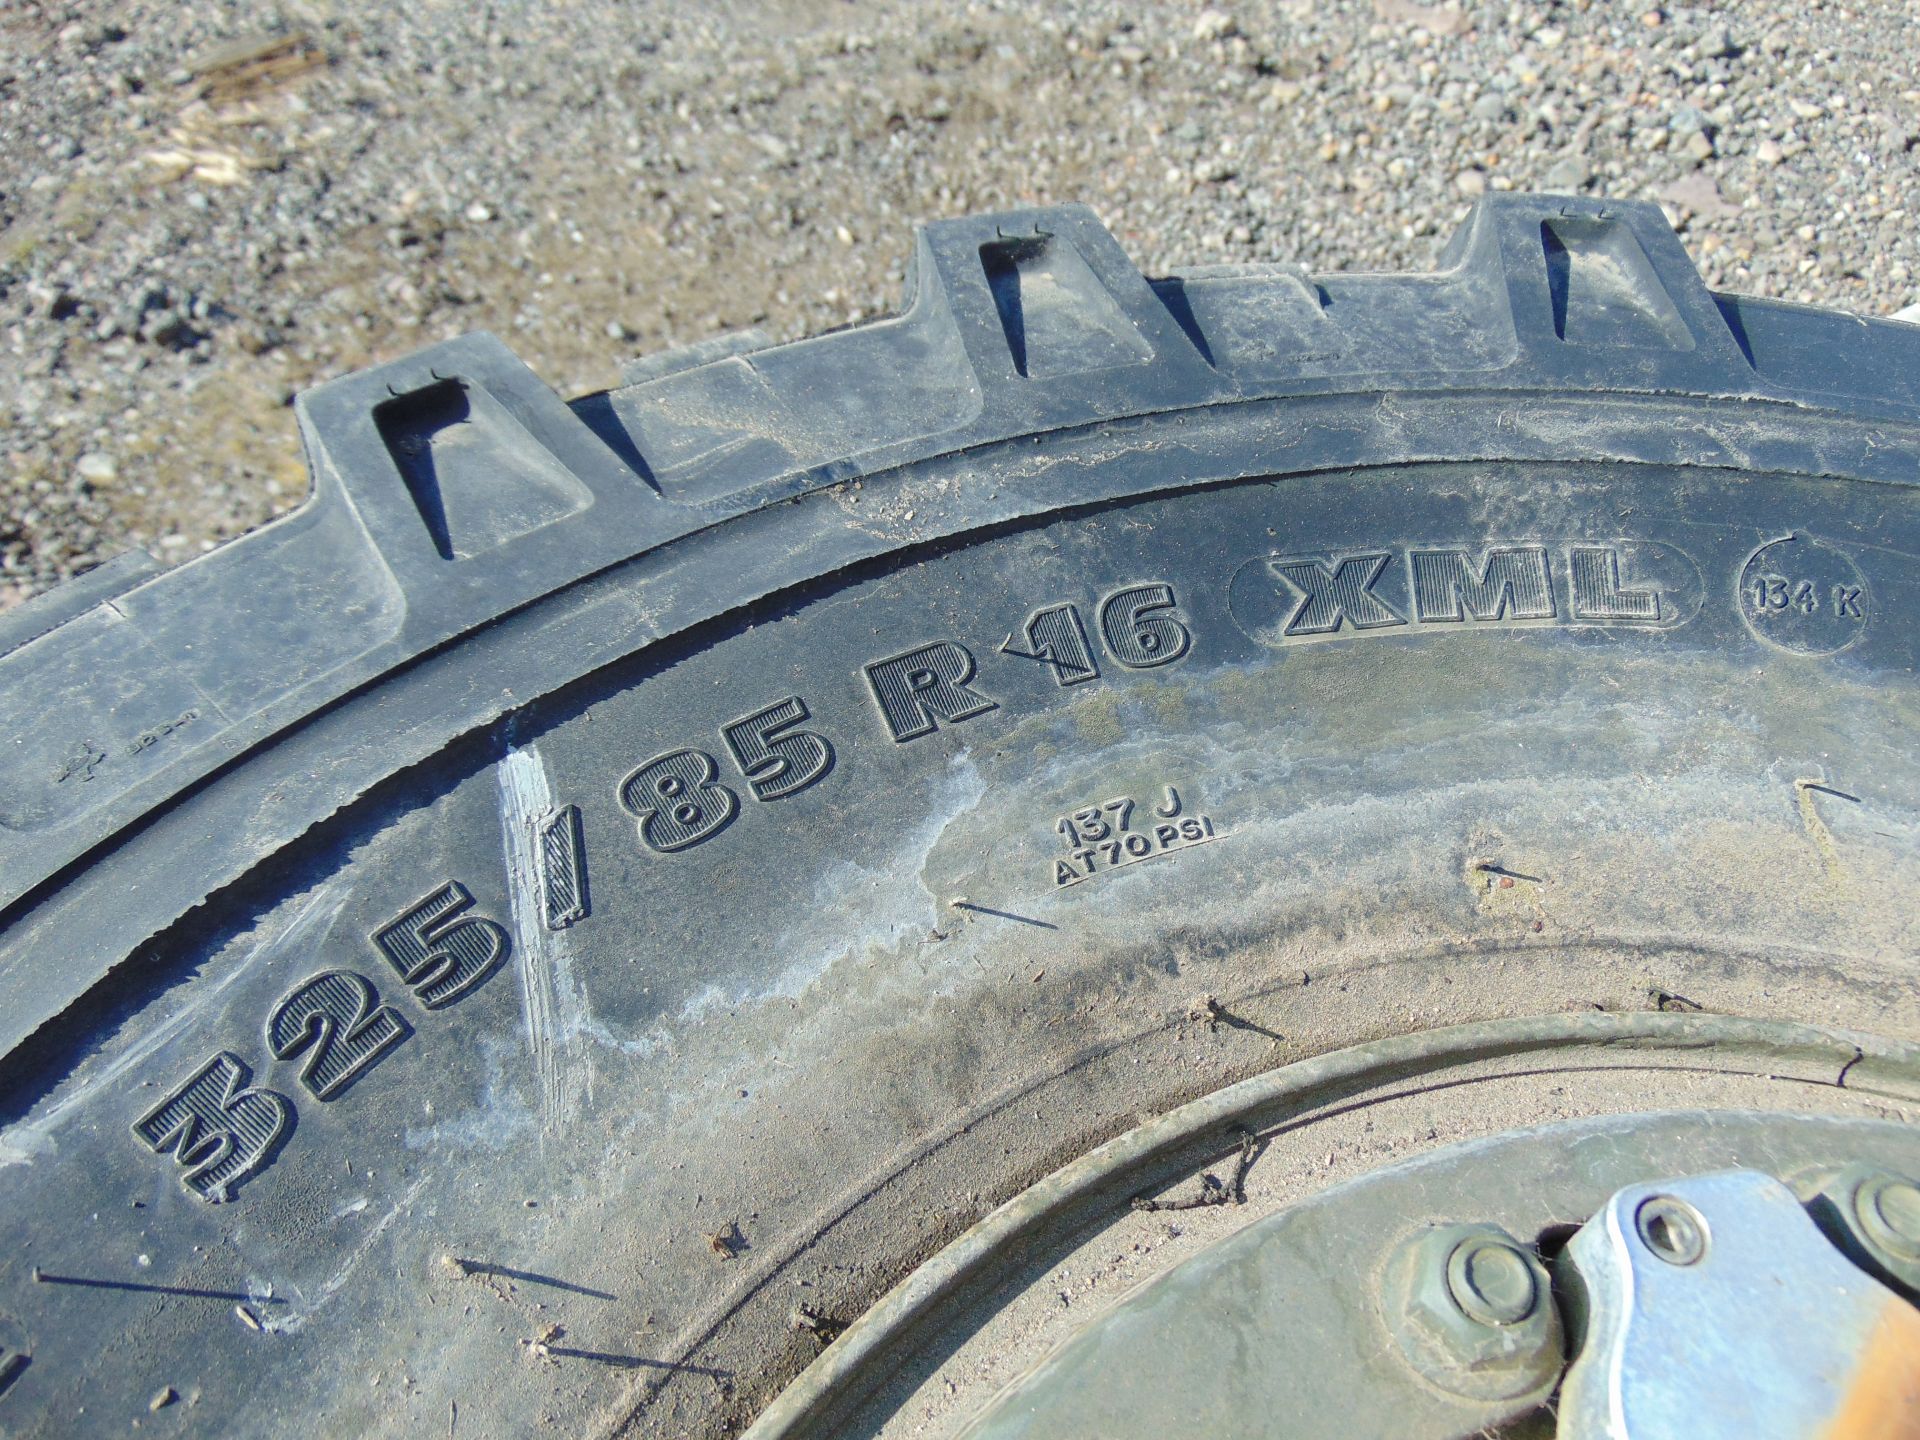 2 x Michelin 325/85 R16 XML Tyres with 8 Stud Rims - Image 6 of 6